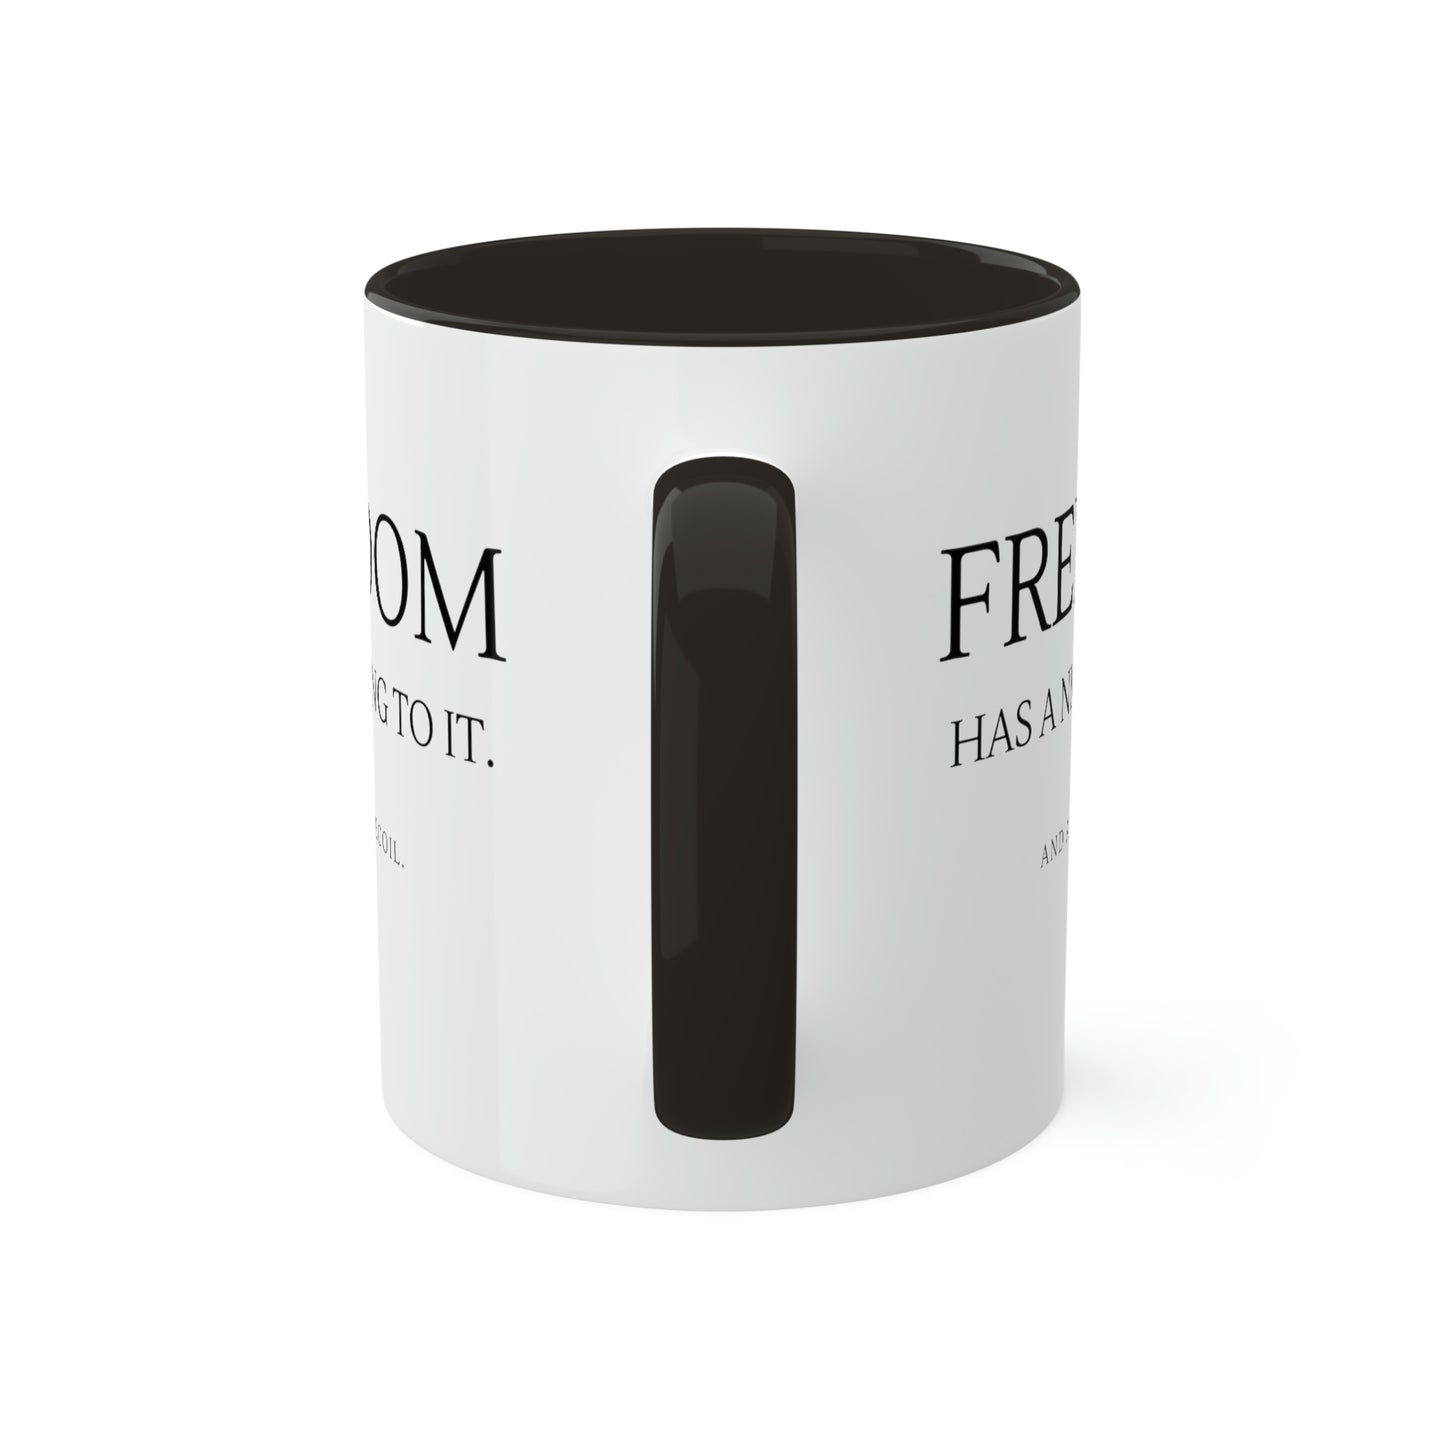 freedom-has-a-nice-ring-to-it-and-a-bit-of-recoil-glossy-mug-11-oz-2a-rear